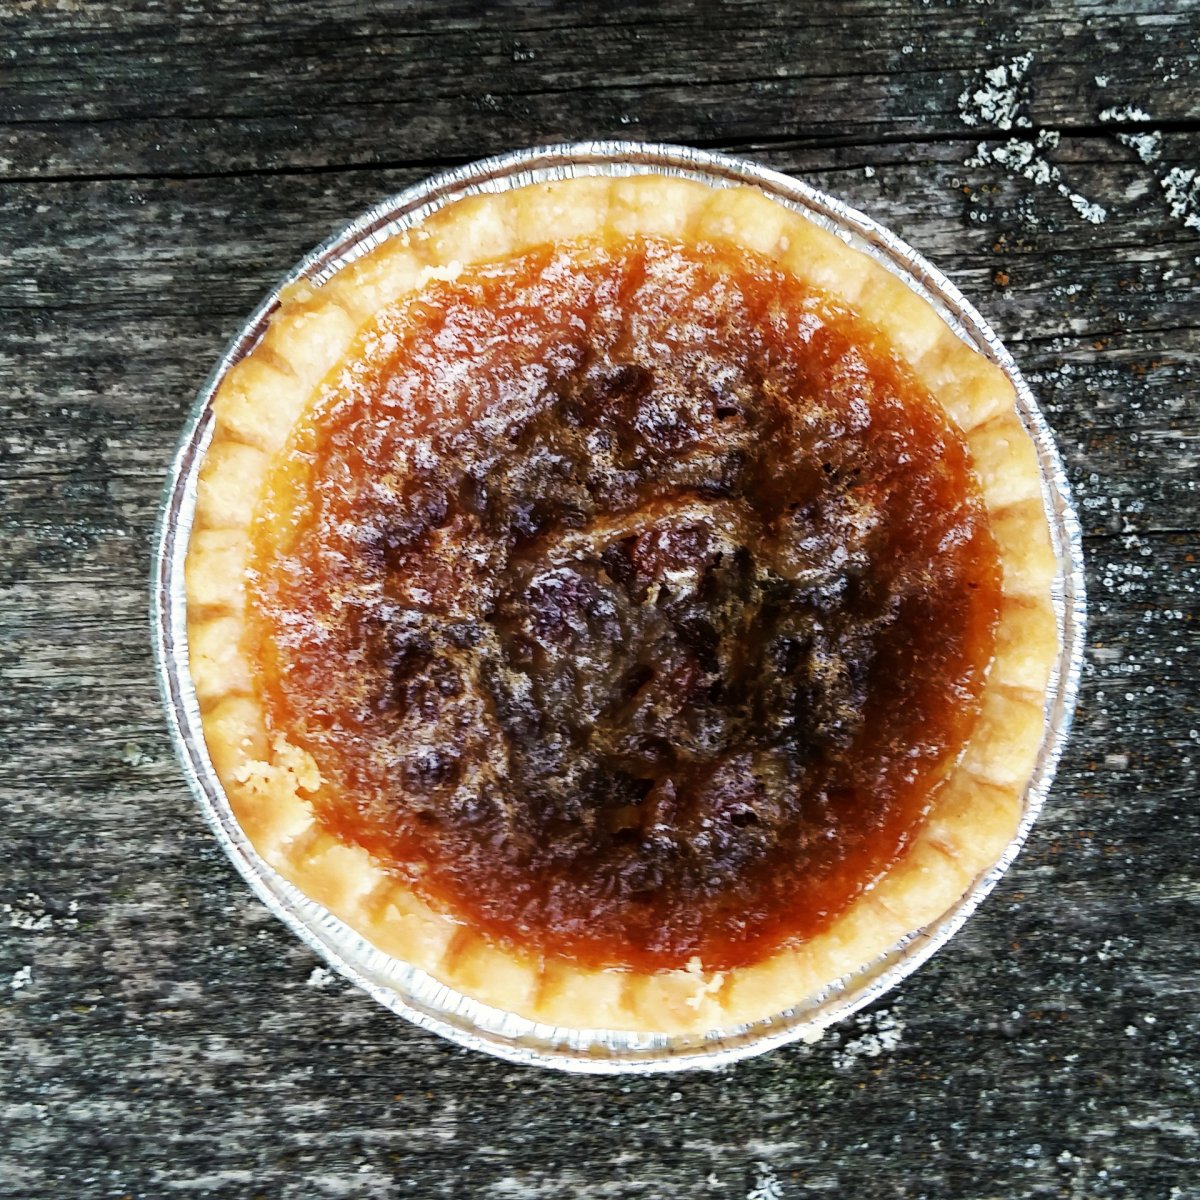 One of the butter tarts featured at the Lumby Butter Tart Festival.